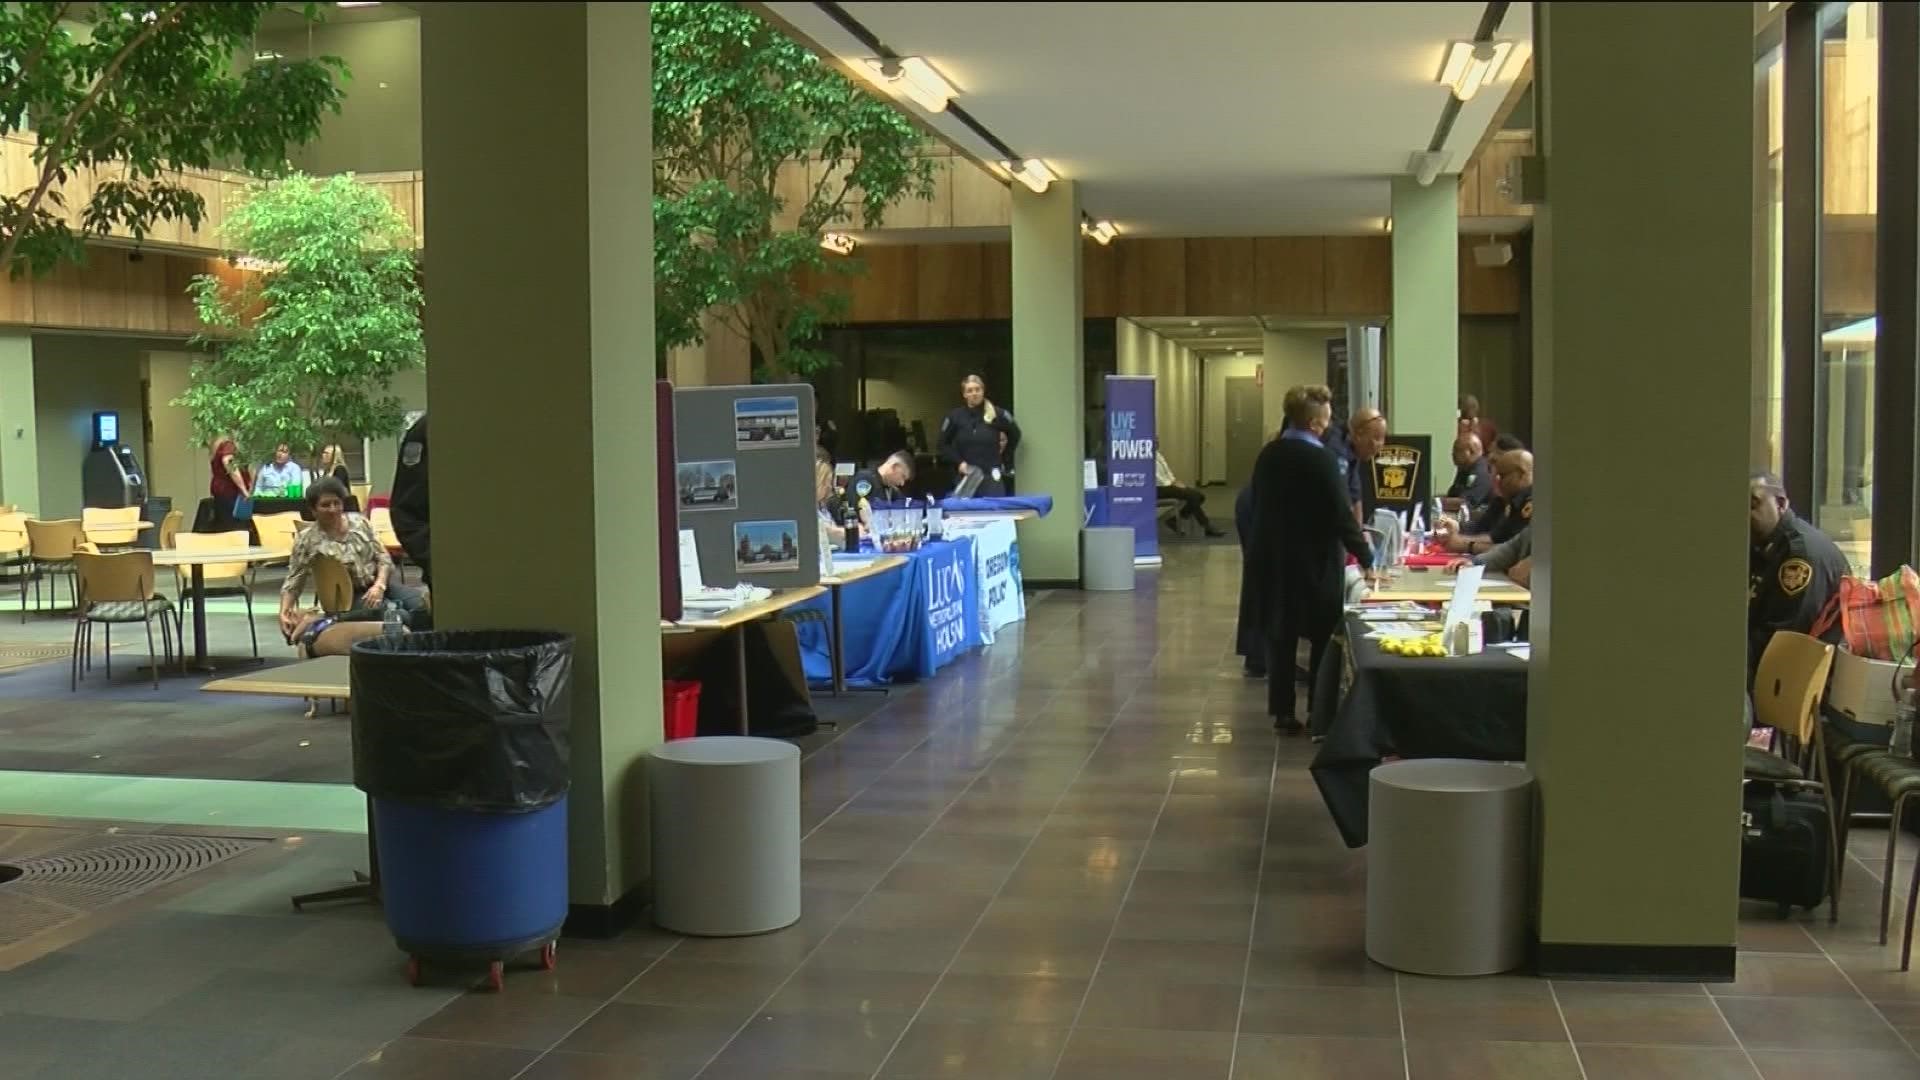 Multiple public safety organizations gathered under one roof for the first time to offer people a chance to apply in person for their organizations.